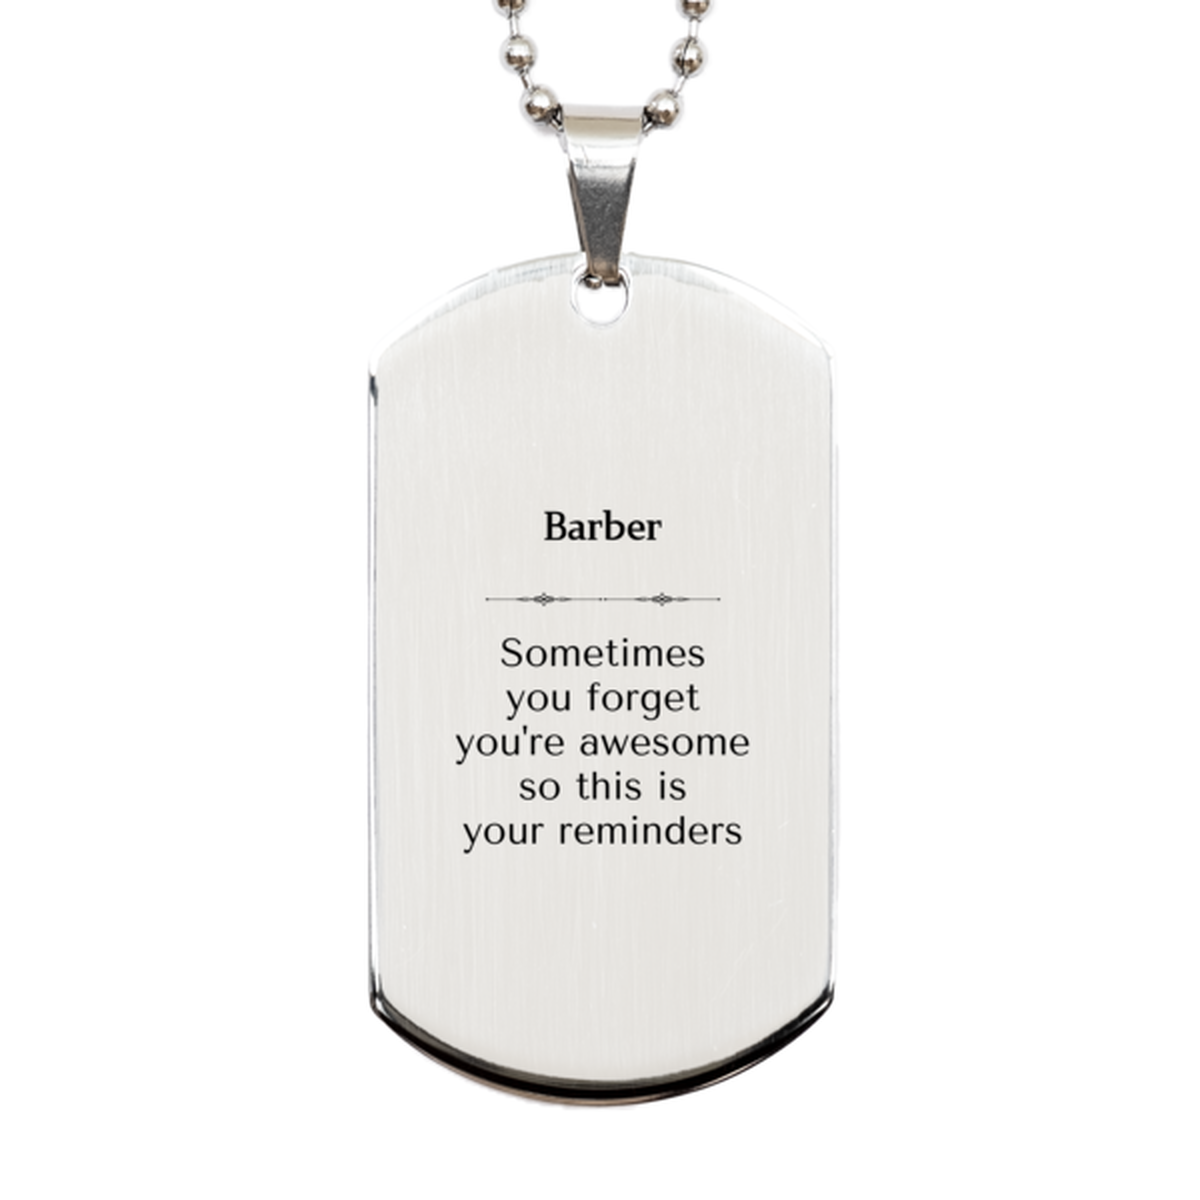 Sentimental Barber Silver Dog Tag, Barber Sometimes you forget you're awesome so this is your reminders, Graduation Christmas Birthday Gifts for Barber, Men, Women, Coworkers